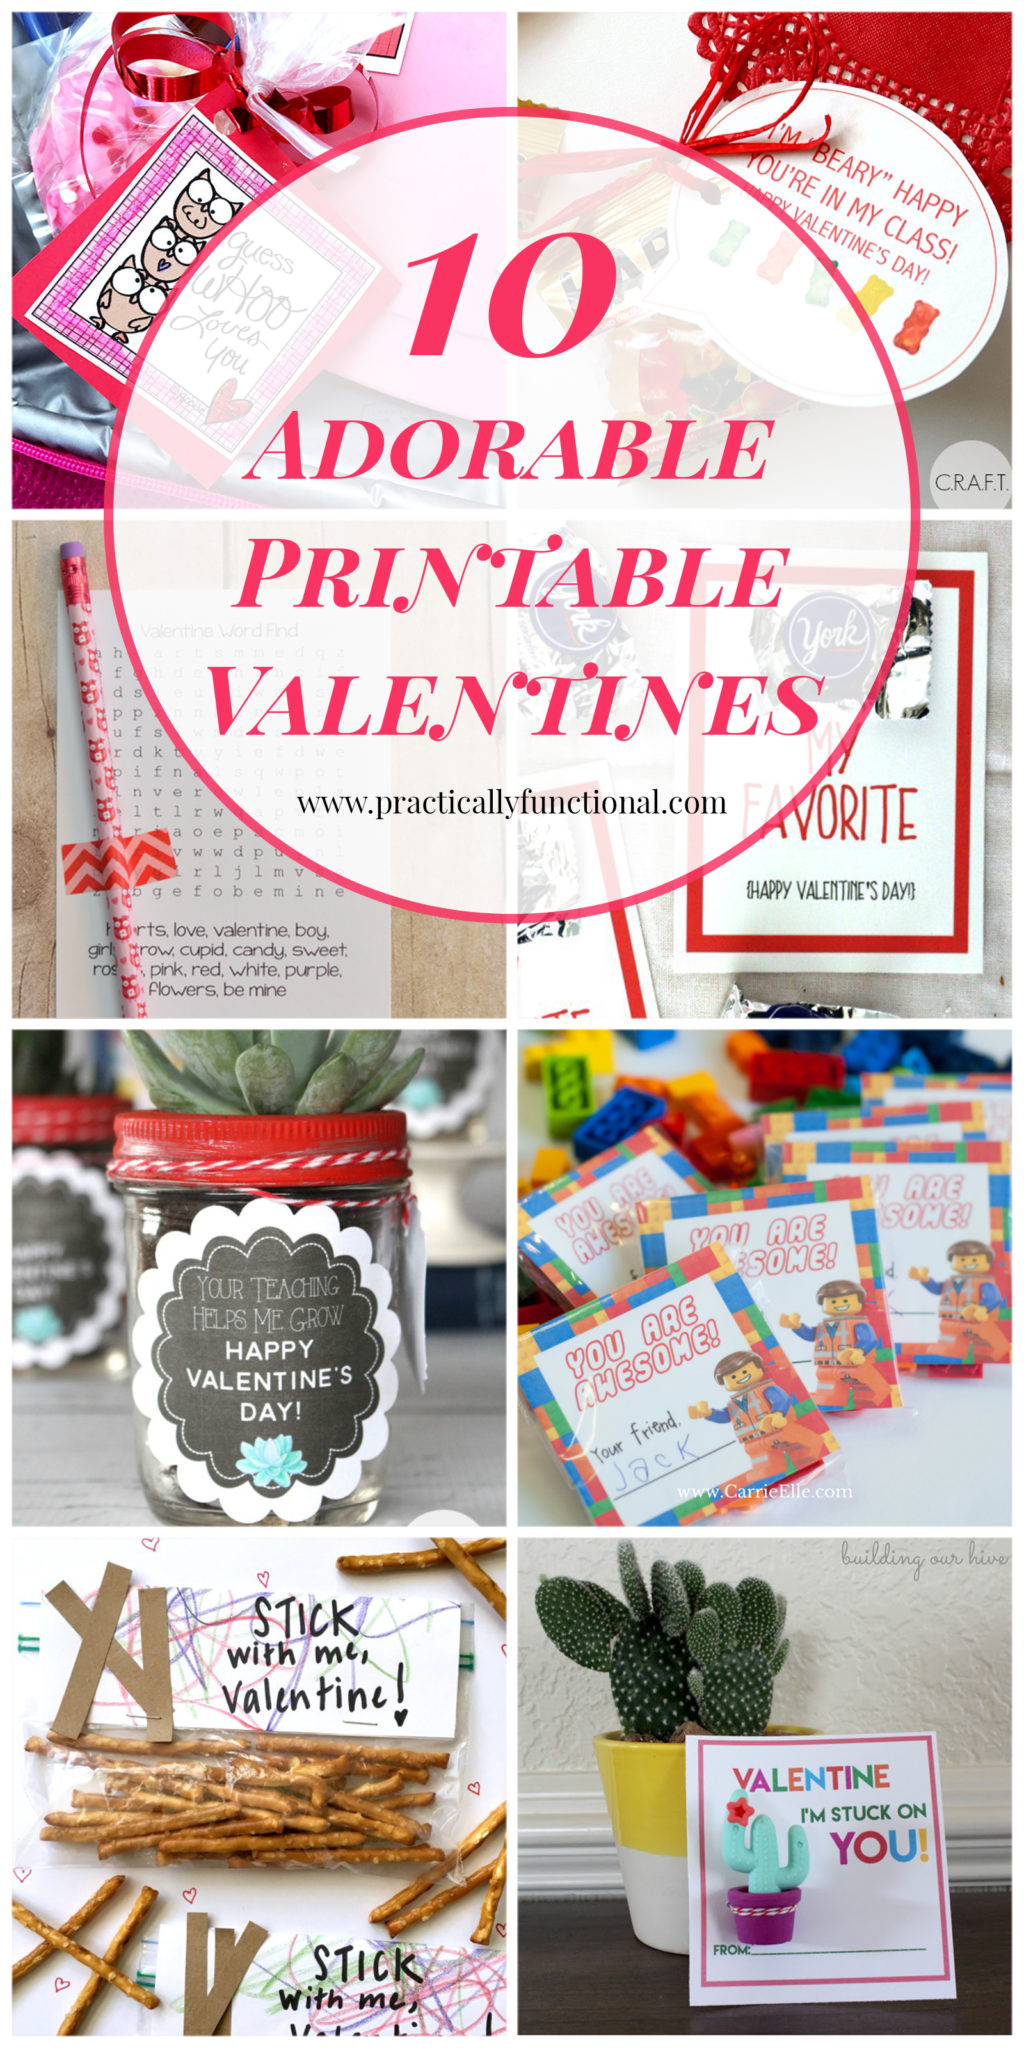 These printable valentines are so cute! Perfect for classroom valentines!